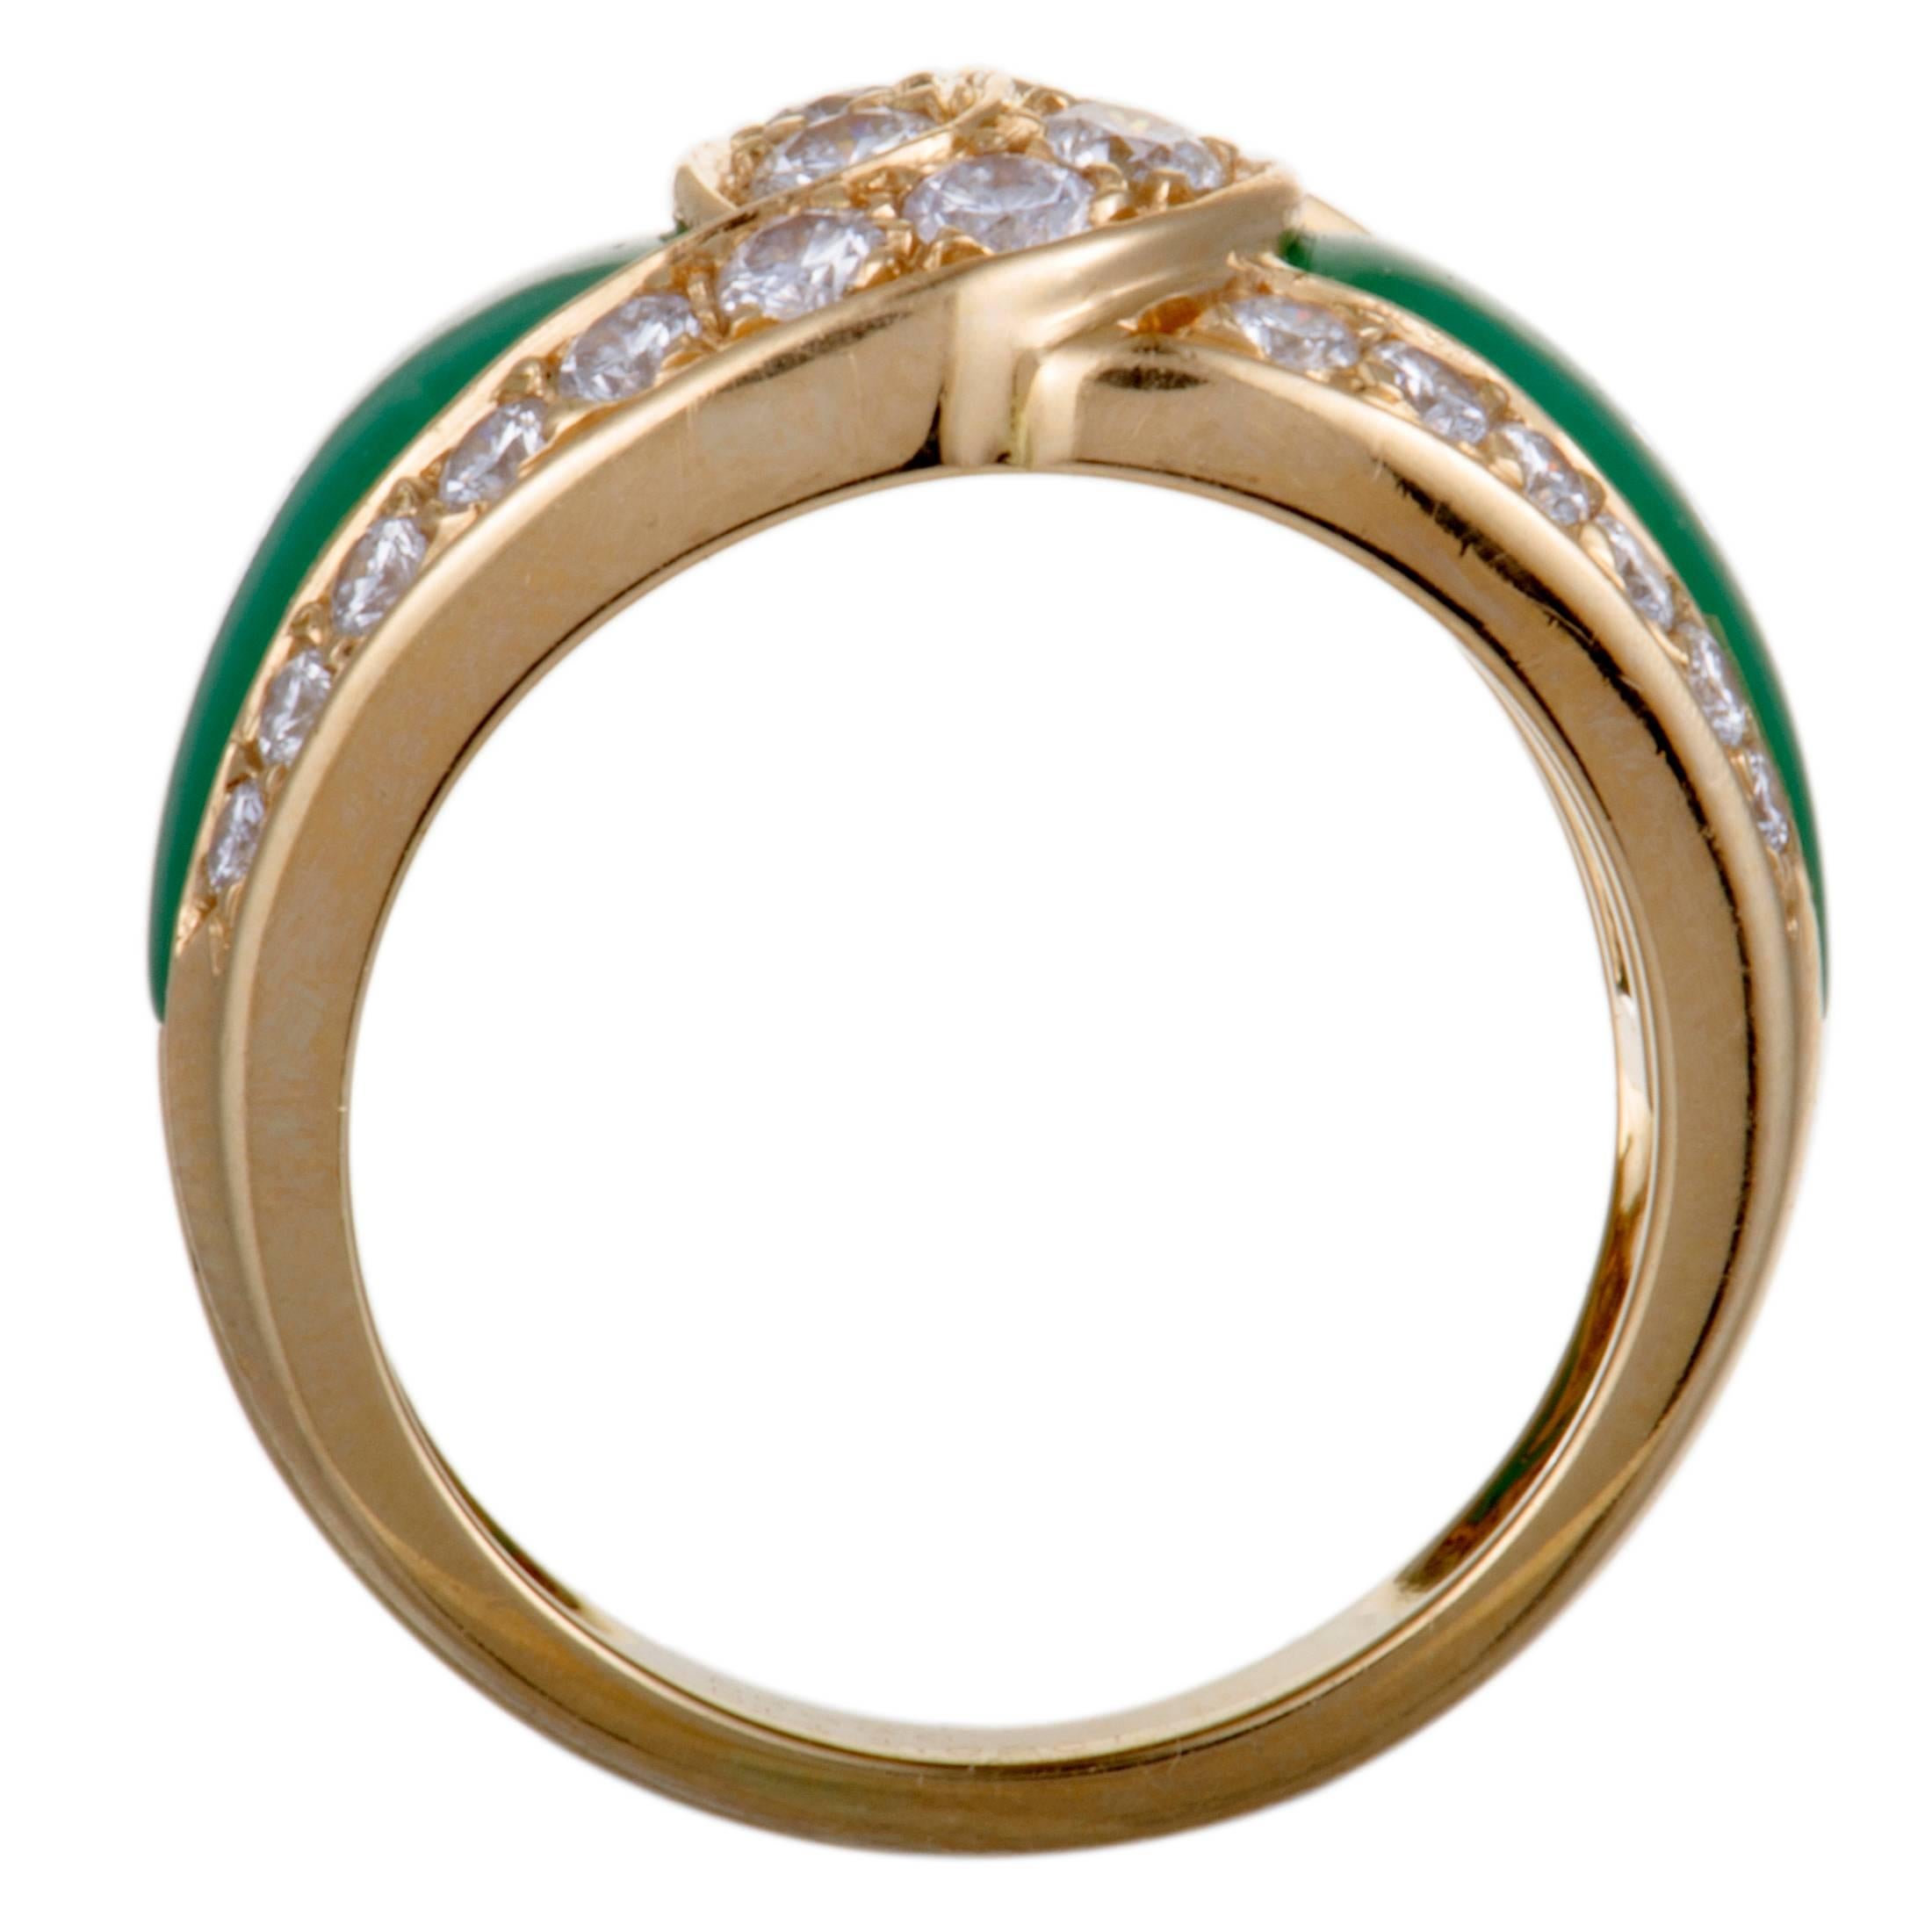 A perfect blend of attractive style and classic luxury, this spectacular ring from Van Cleef & Arpels boasts a compellingly elegant appeal. Crafted from radiant 18K yellow gold, the ring is decorated with green chrysoprase and 1.02 carats of